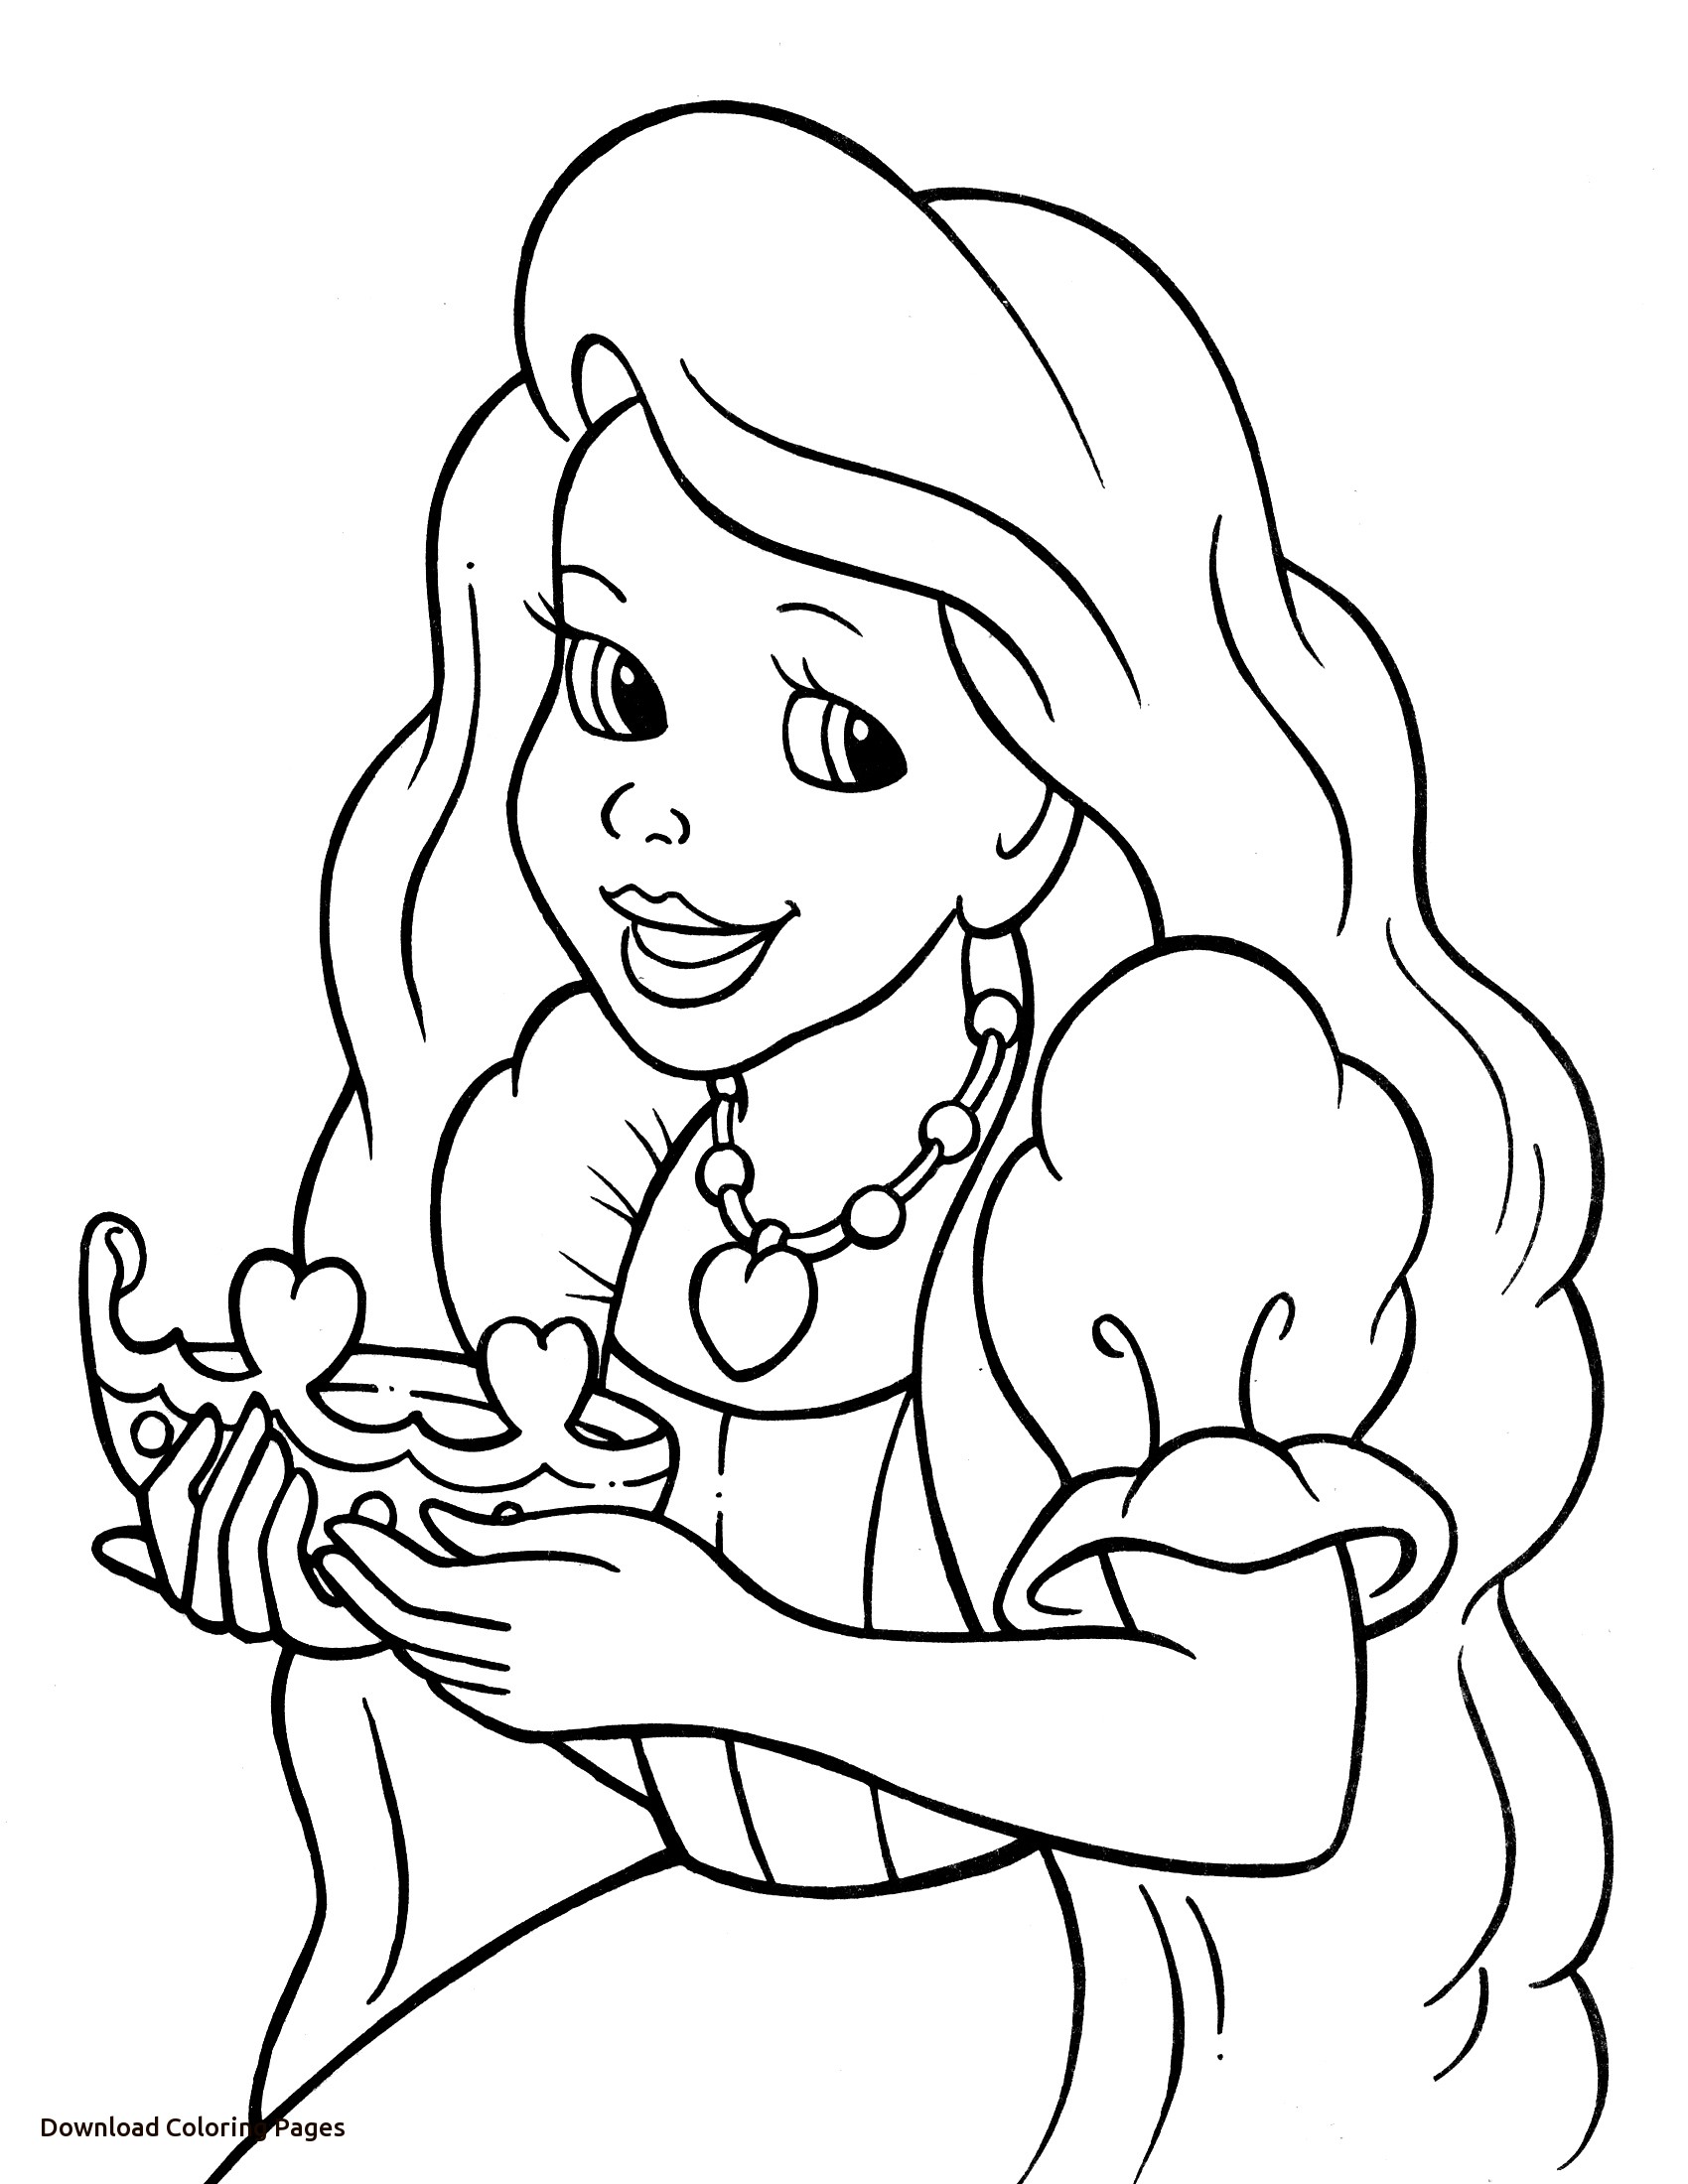 crayola coloring pages